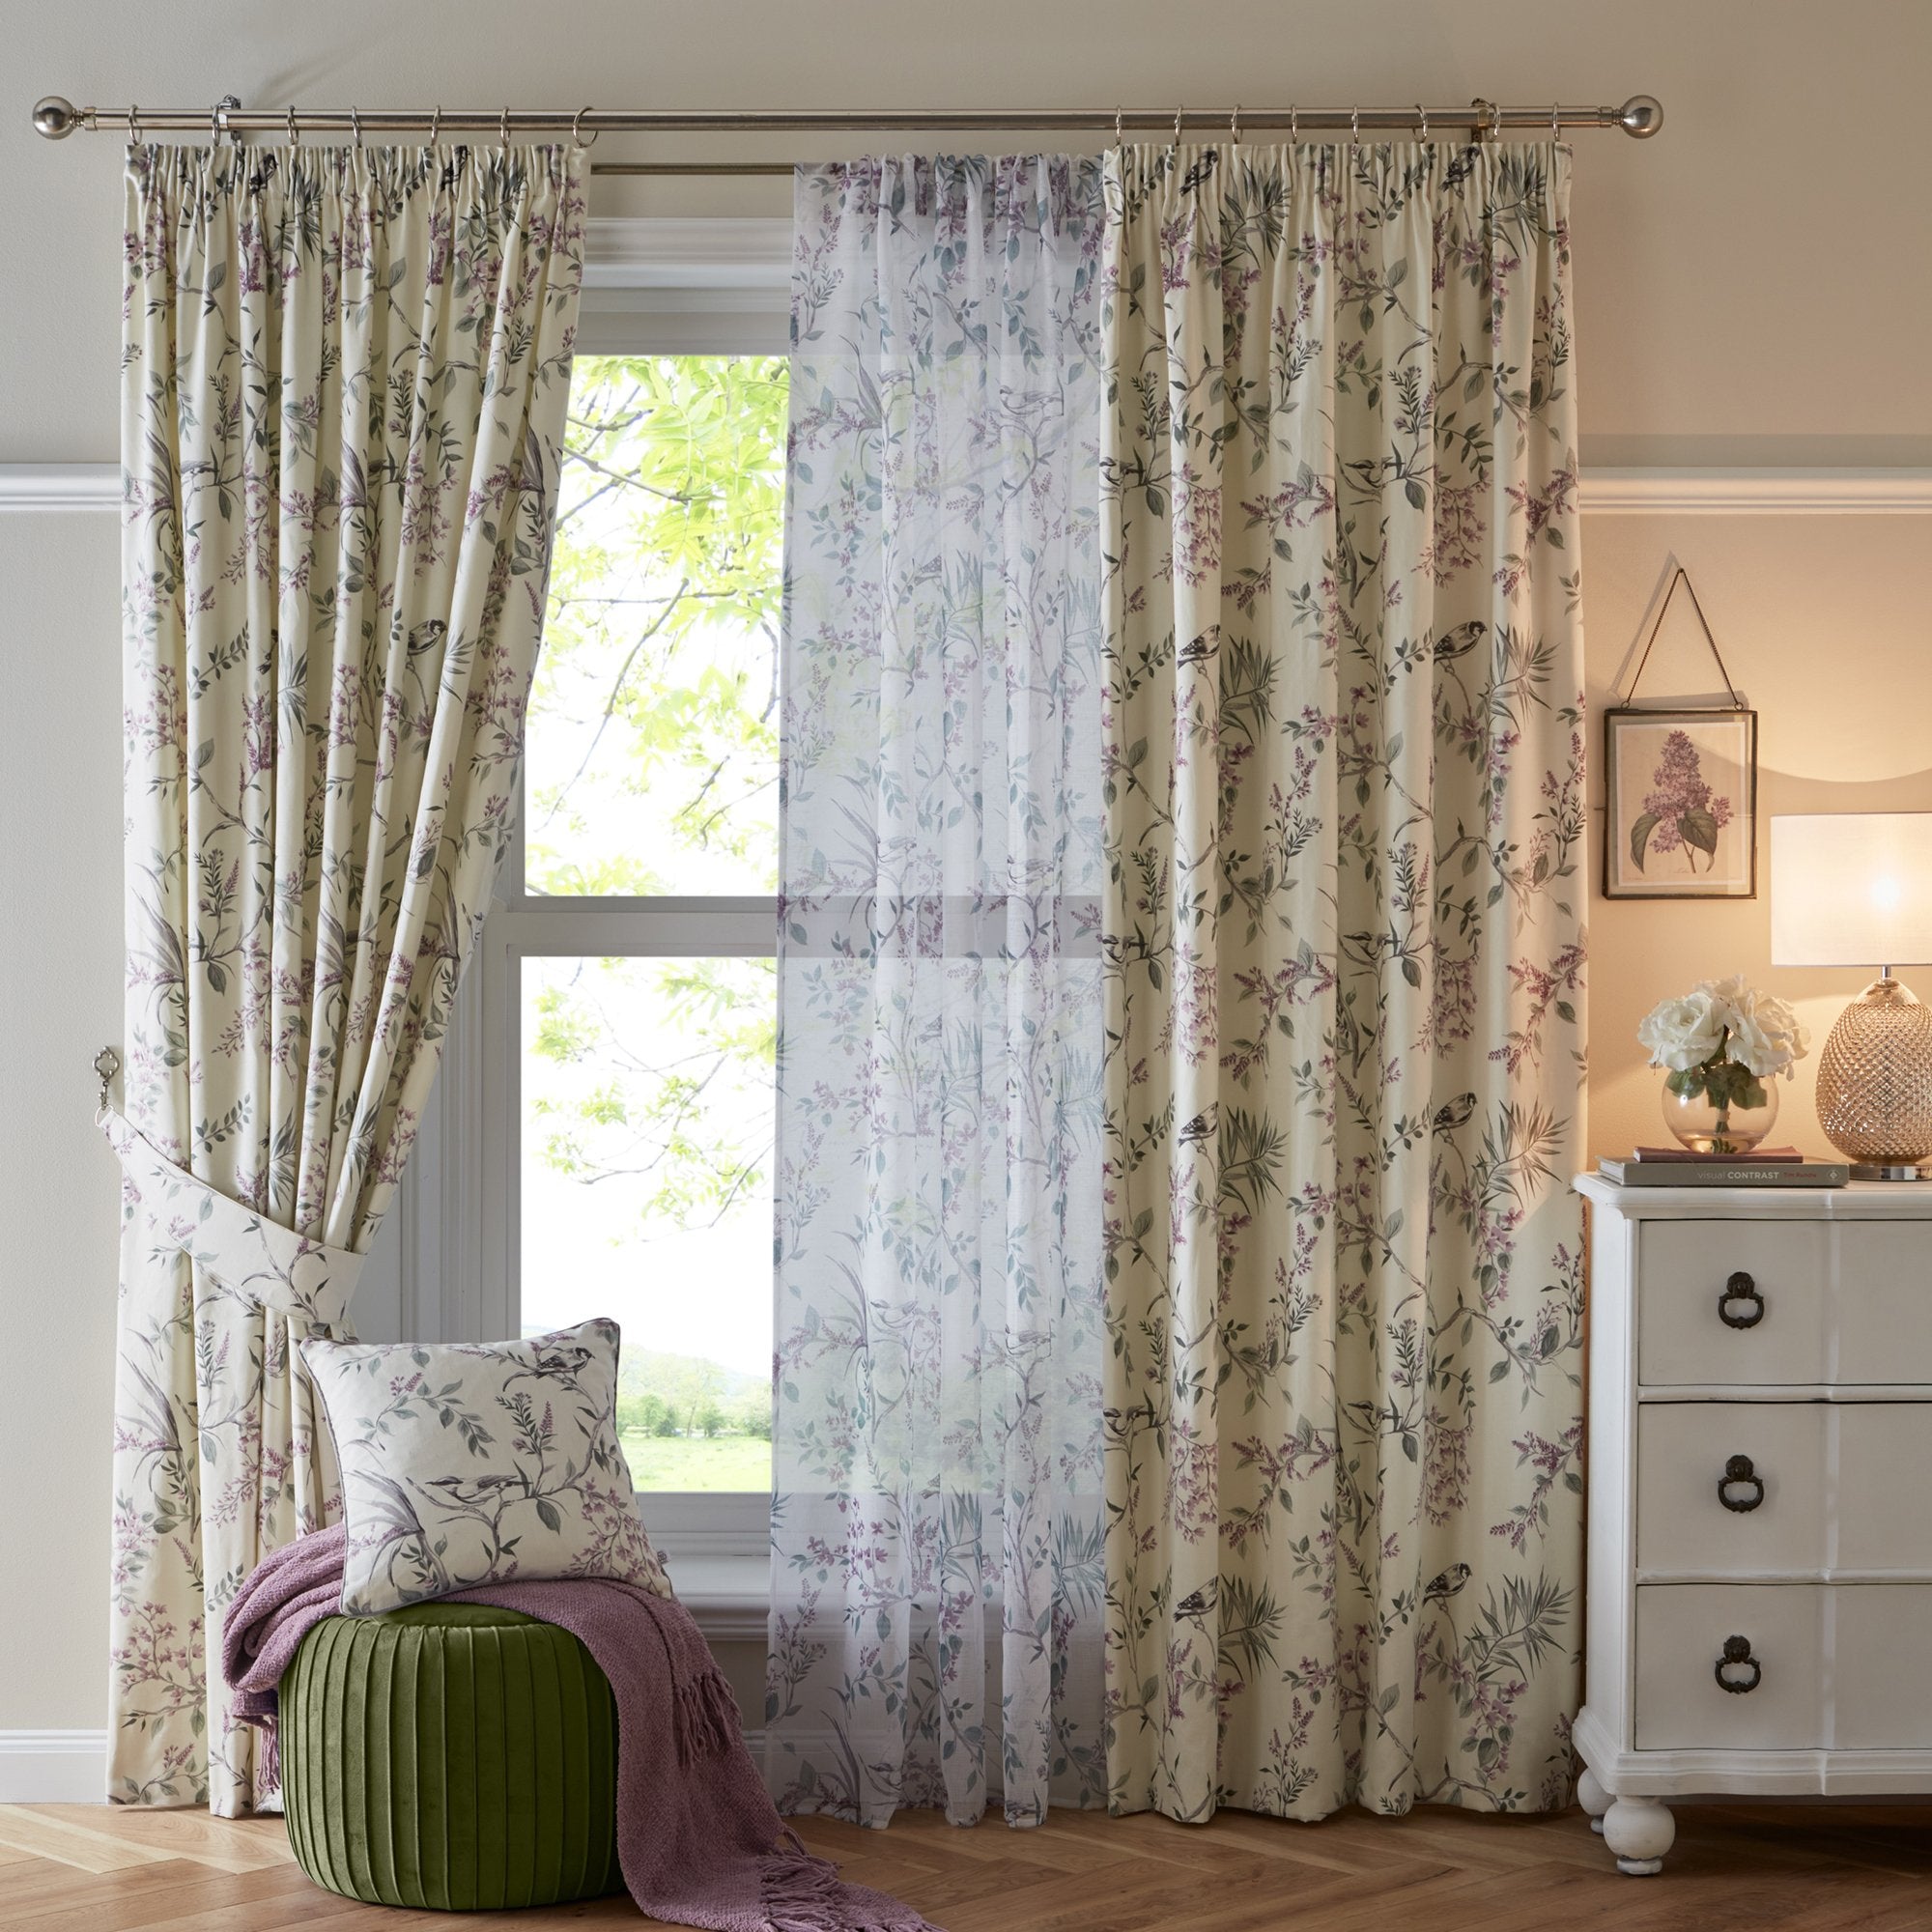 Voile Panel Jazmine by Dreams & Drapes Curtains in Heather